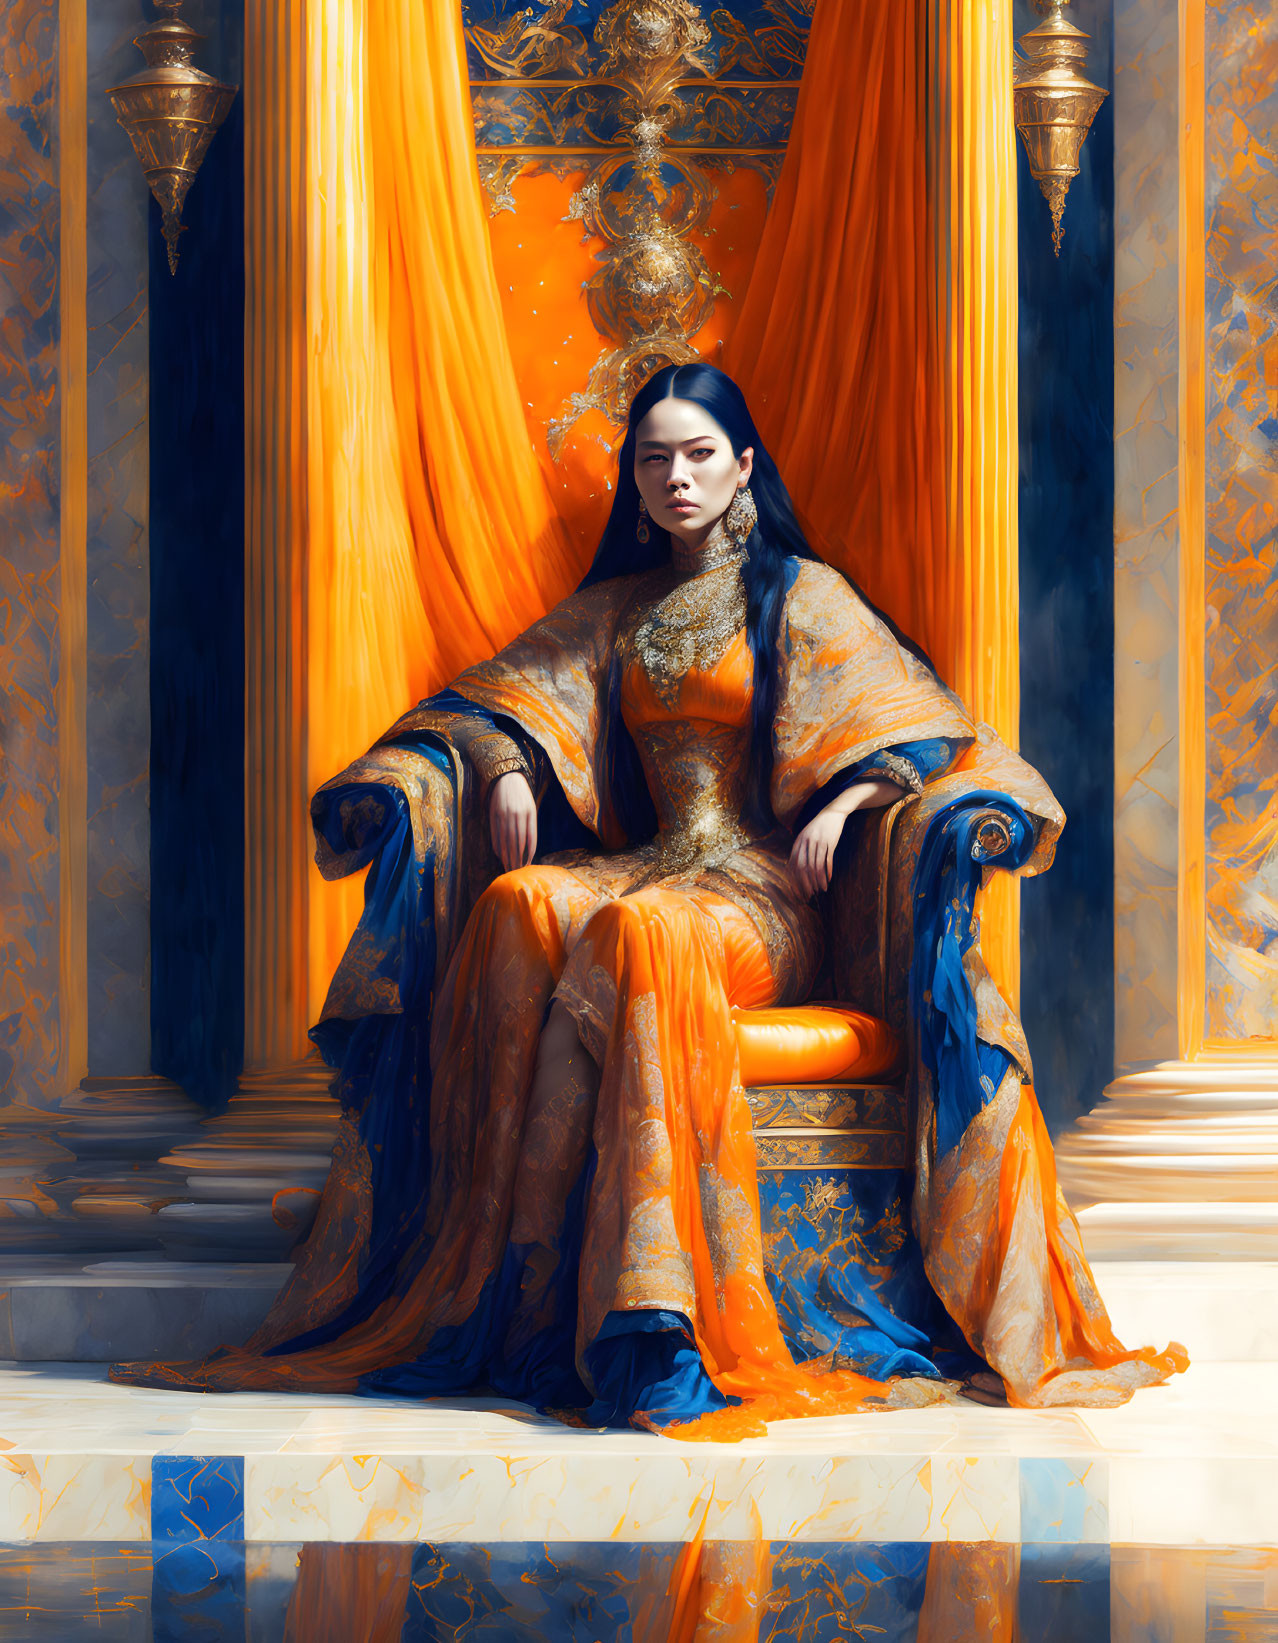 Regal woman in golden dress on throne with orange fabric and architectural backdrop